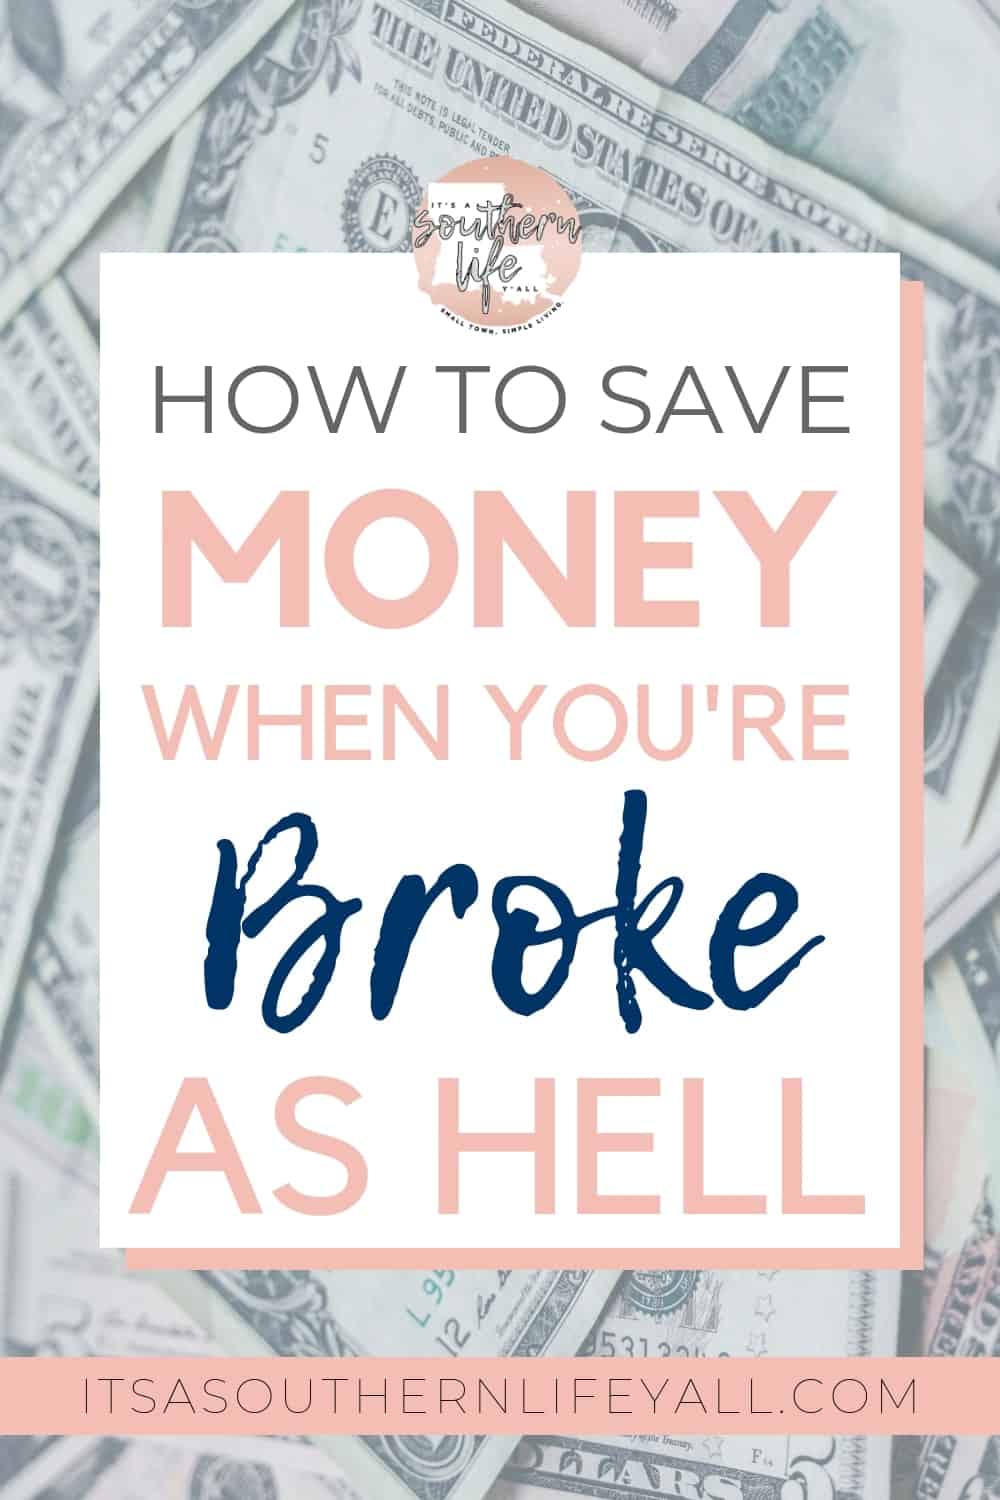 Image of scattered money with How to save money when you're broke as hell text overlay